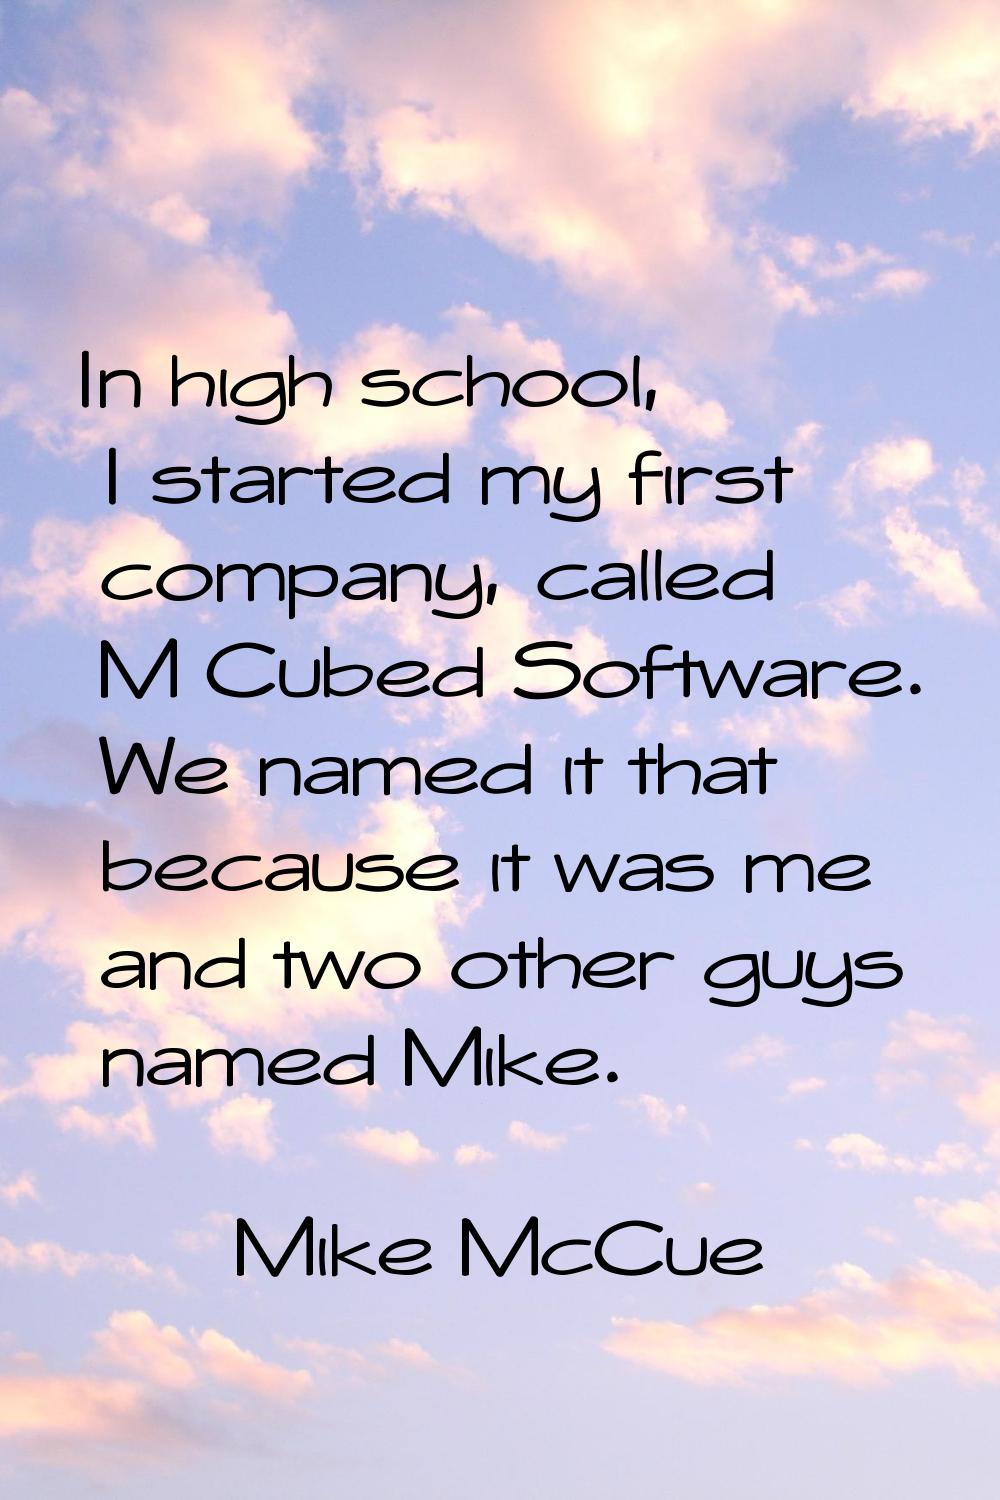 In high school, I started my first company, called M Cubed Software. We named it that because it wa